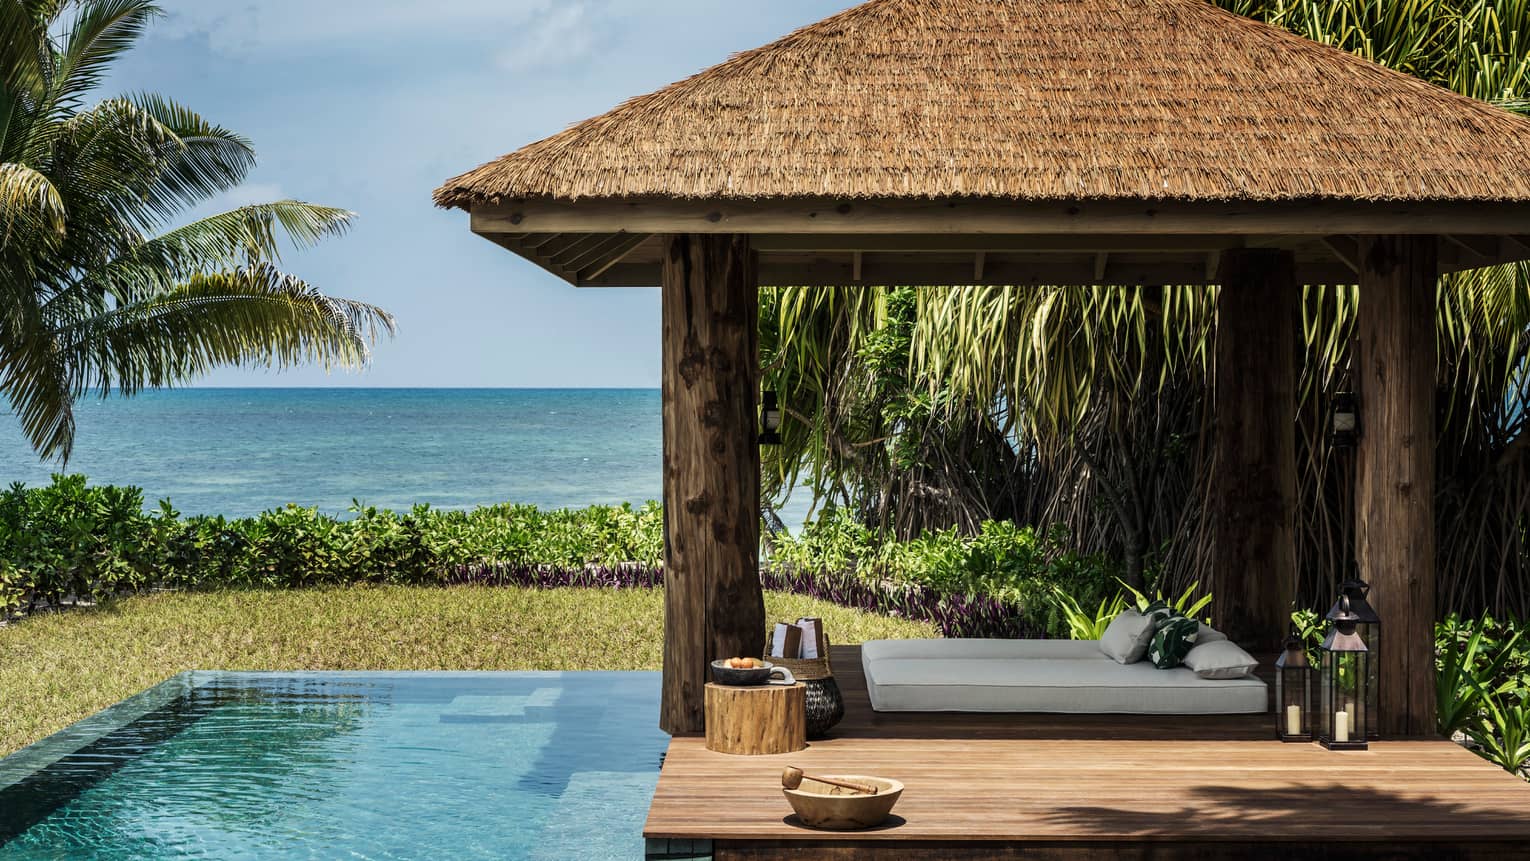 Four-pillar wooden cabana and infinity edge pool, sea in the distance